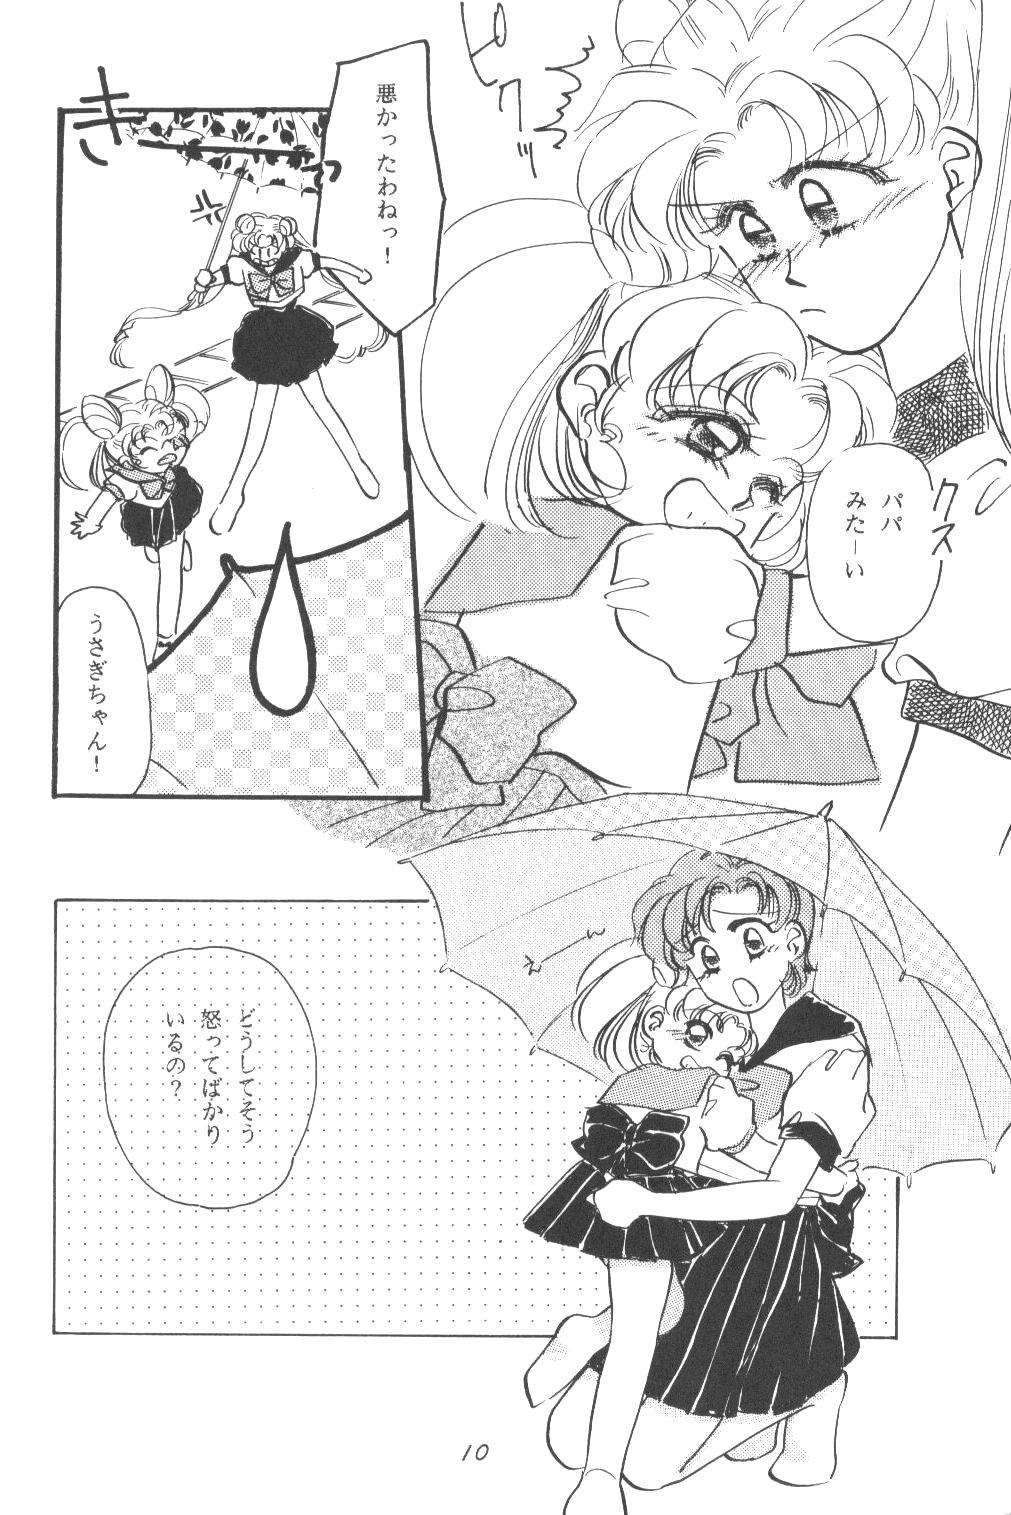 Toy Chibiusa - Sailor moon Storyline - Page 9